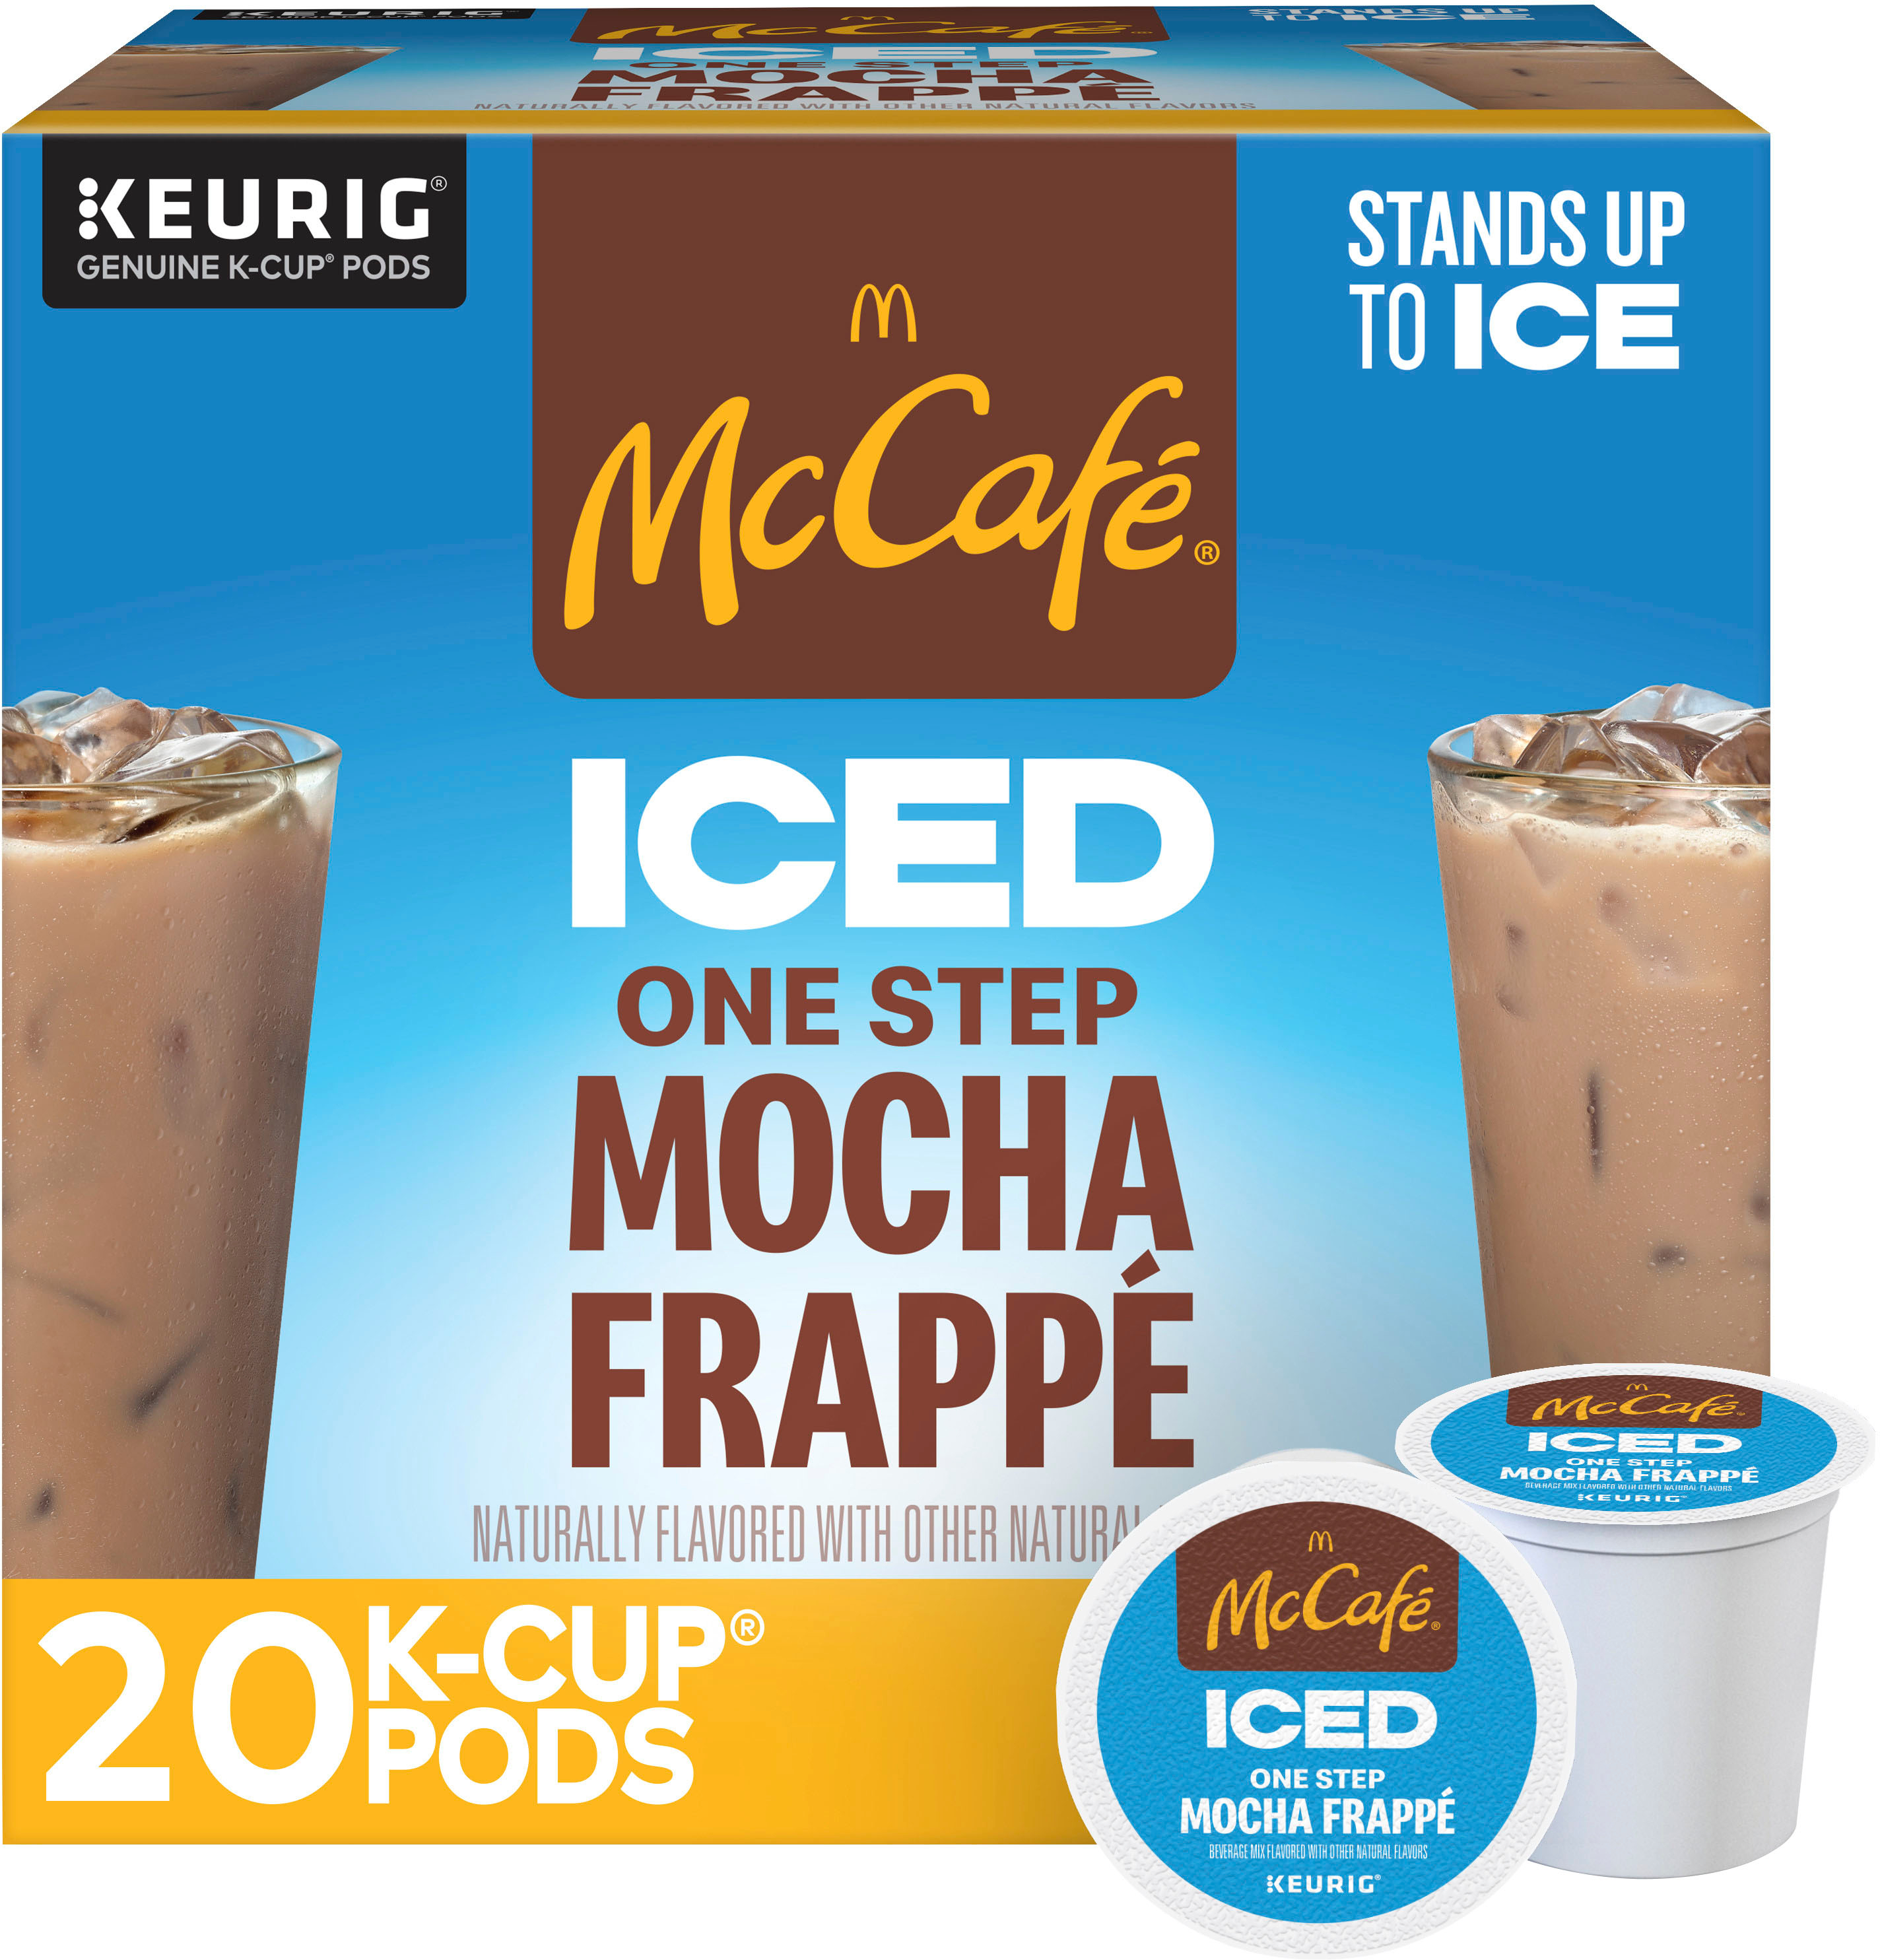 How To Make Iced Coffee With Keurig